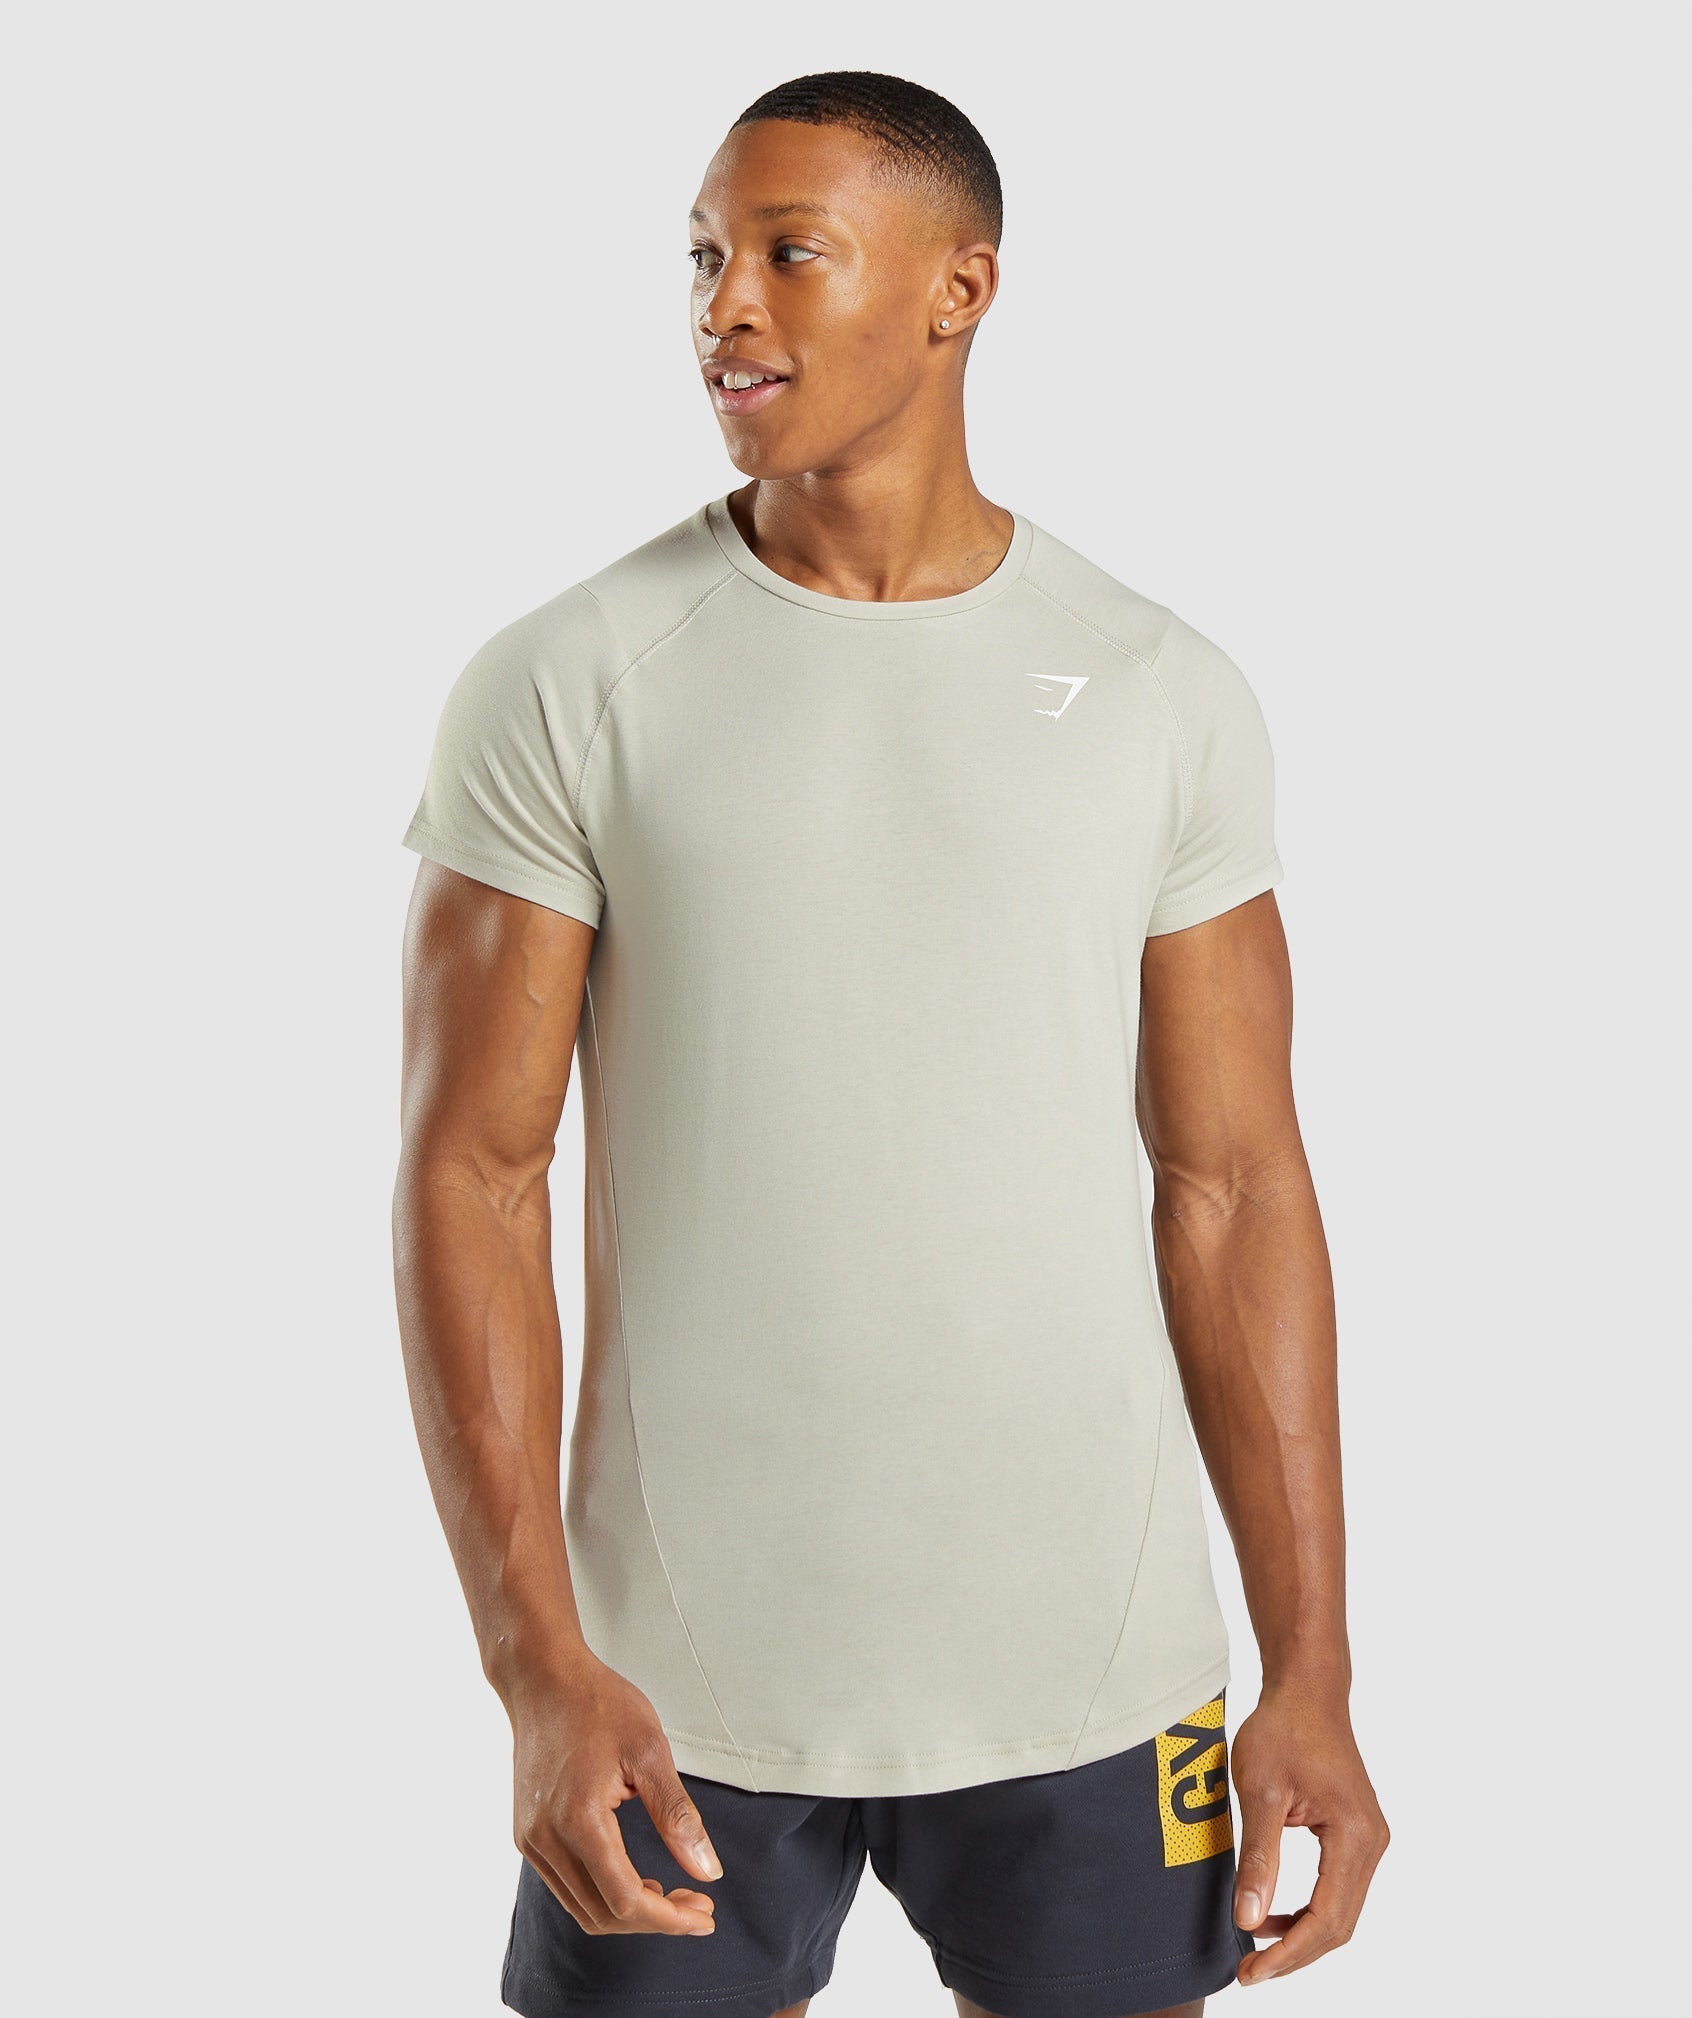 Bold T-Shirt in Pebble Grey - view 3